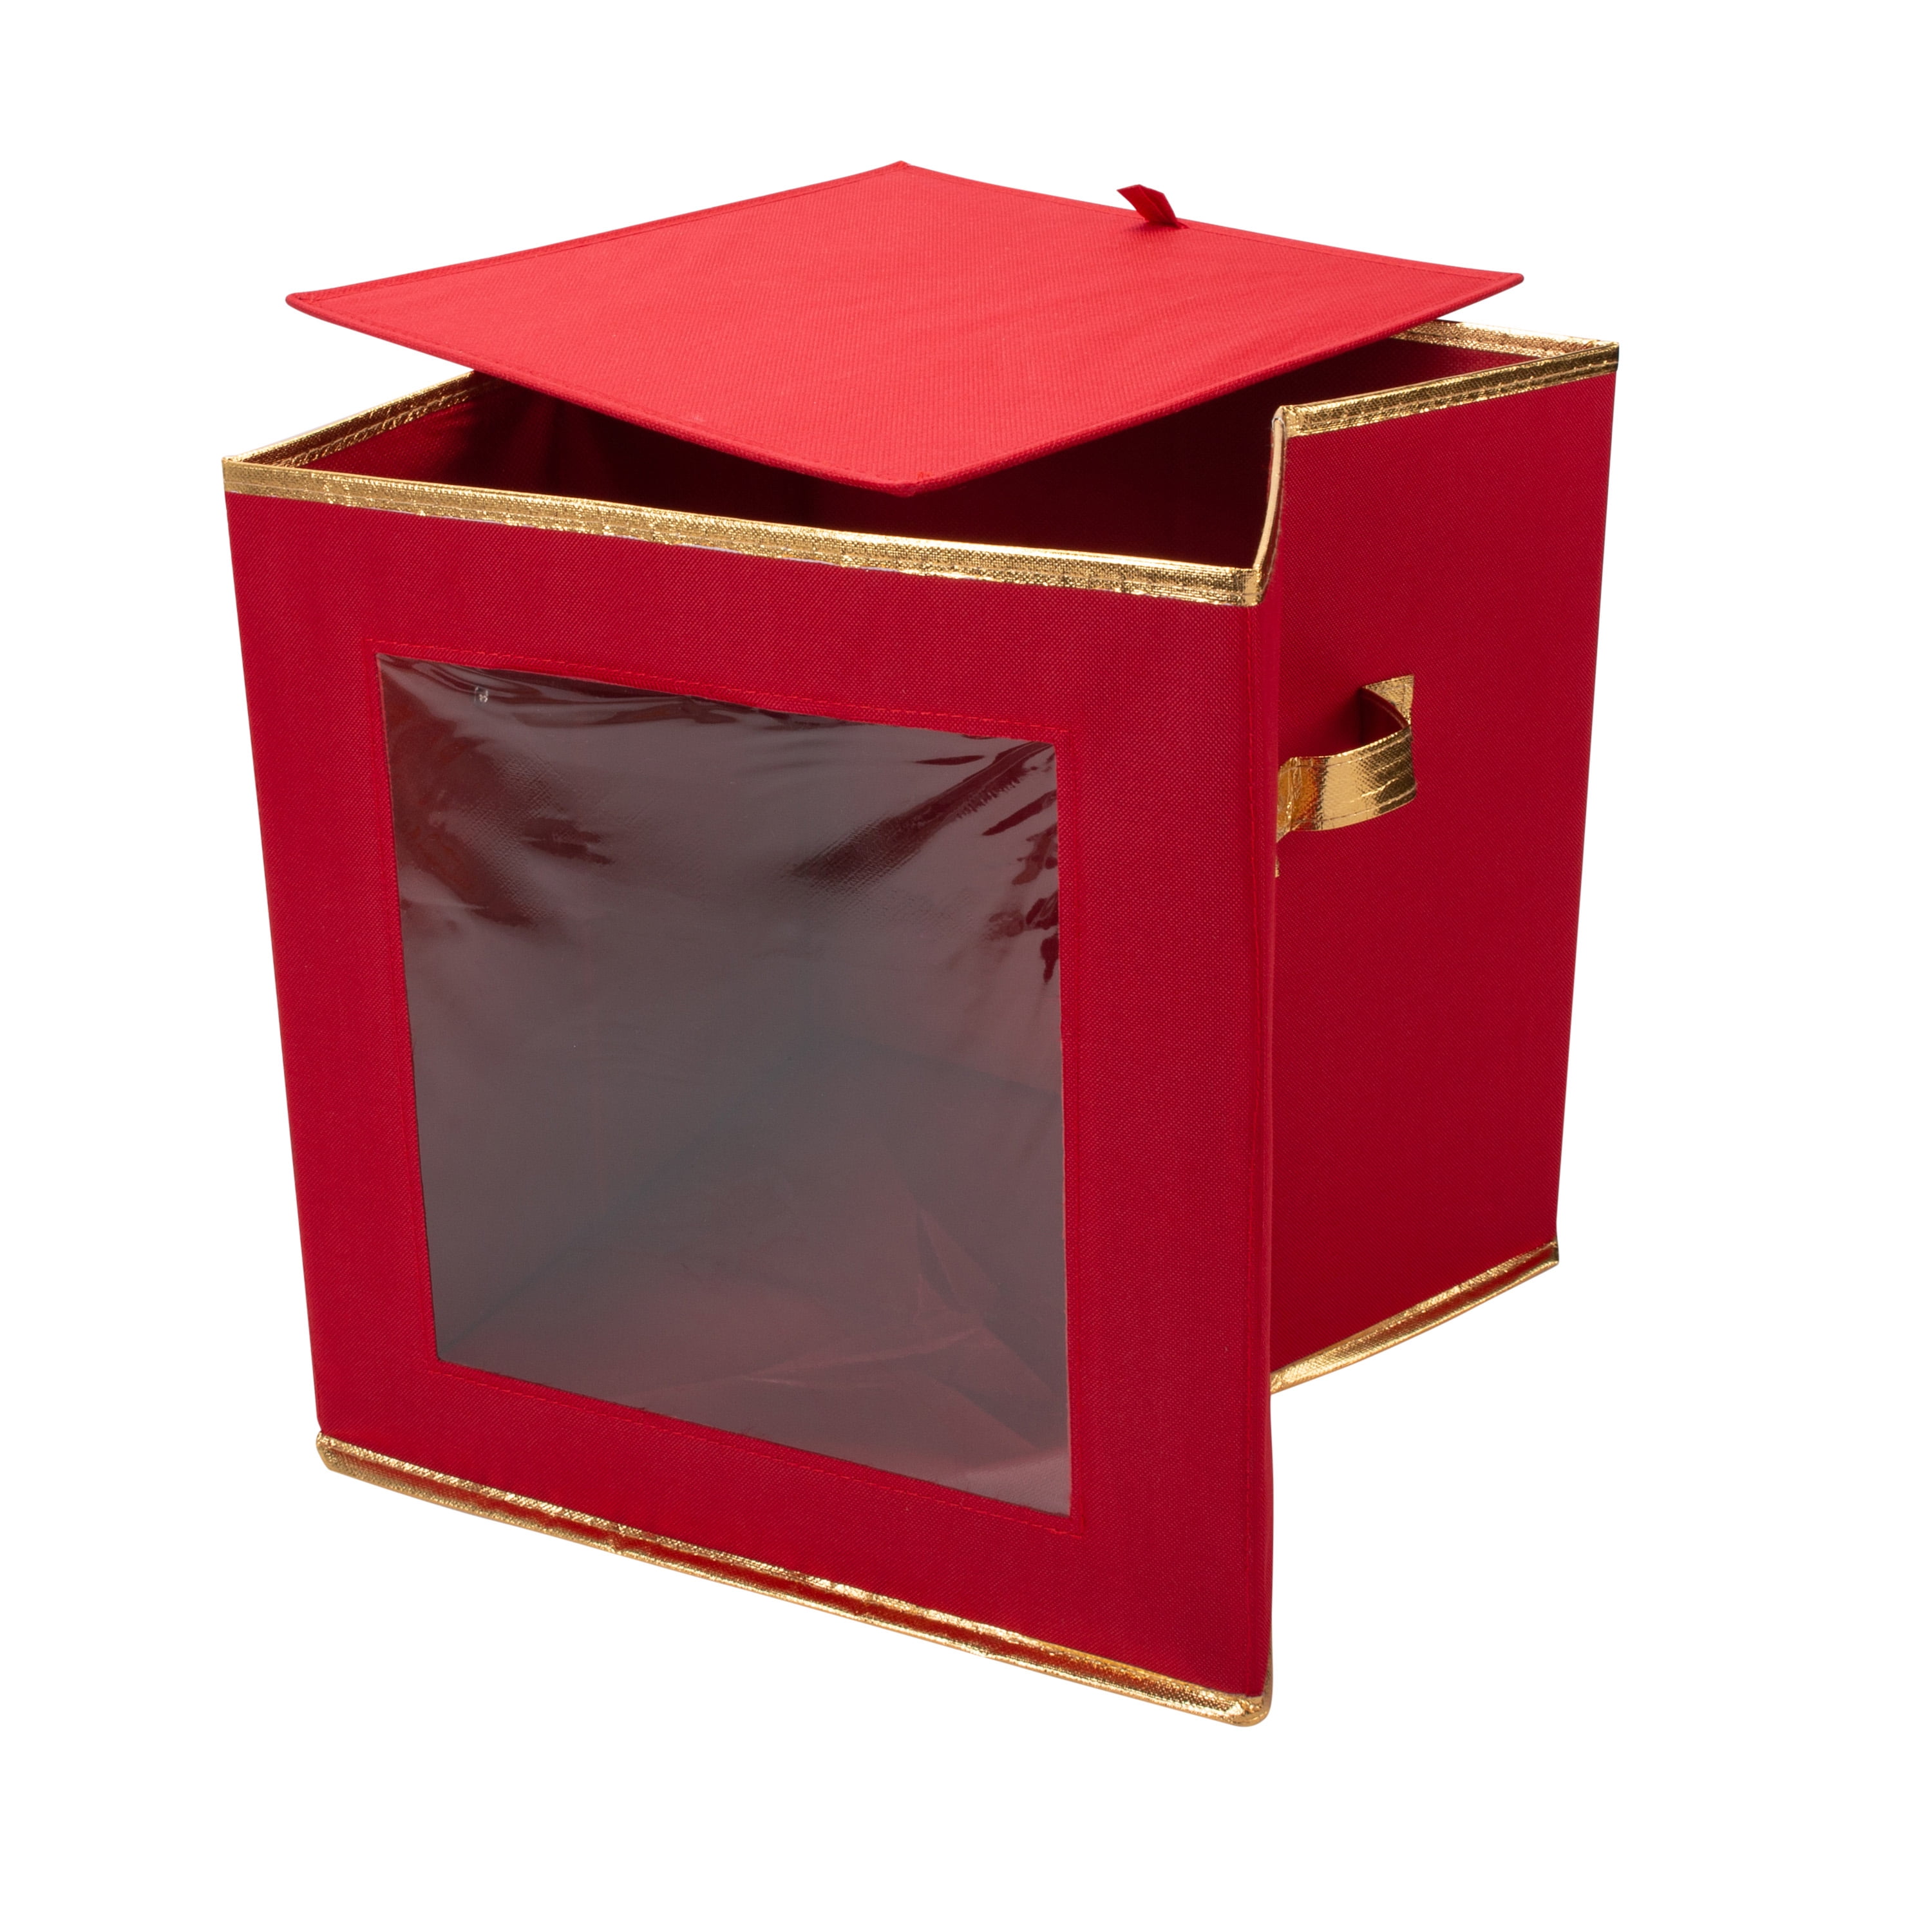 Simplify 64 Count Large Ornament Storage Box with See Through Window - Red